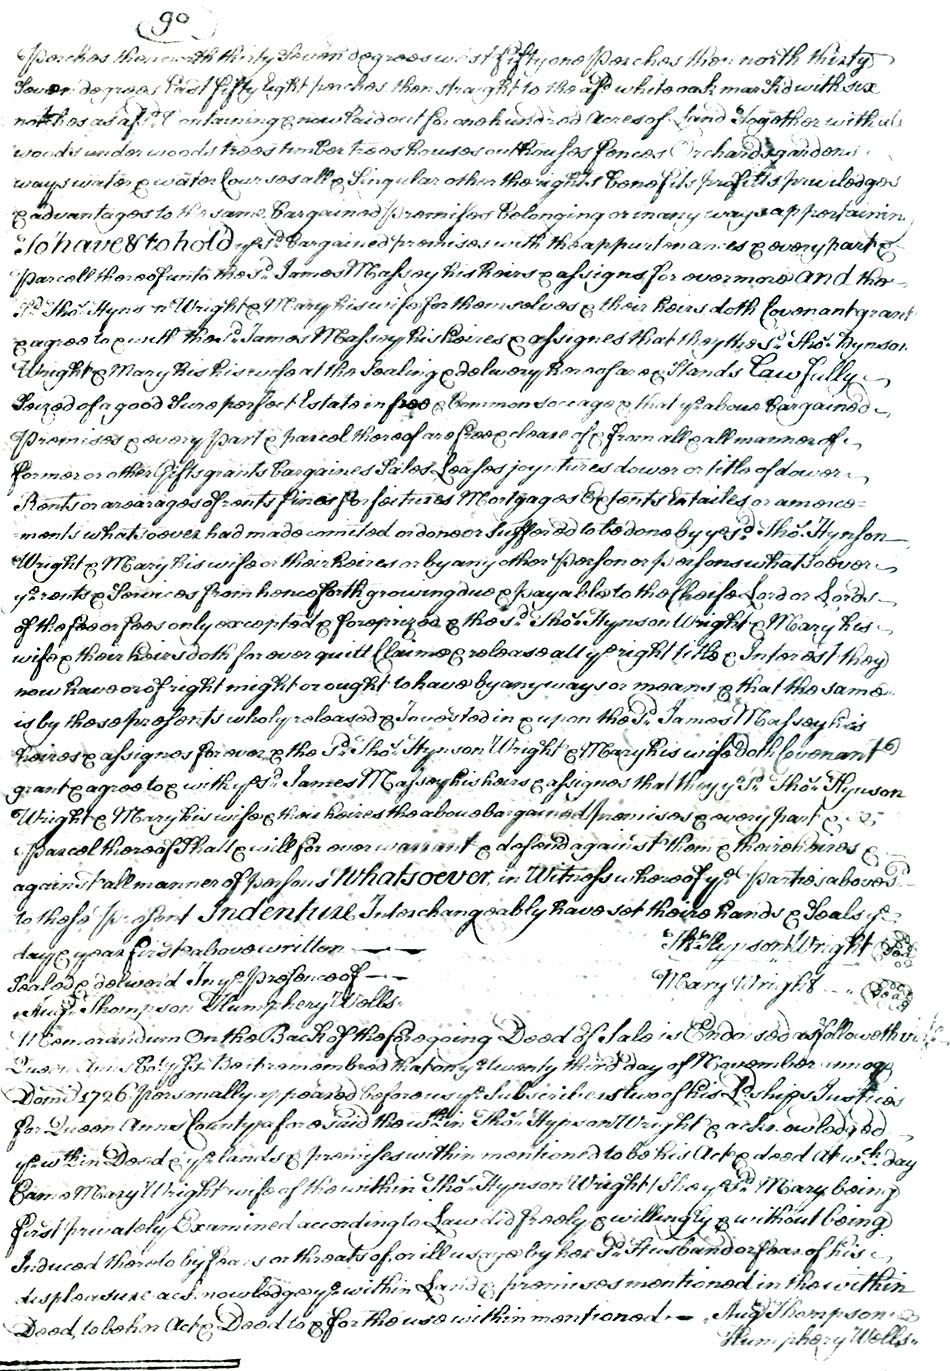 Queen Anne's County, Maryland Land Records: Thomas Hynson Wright to James Massey, November 24, 1726